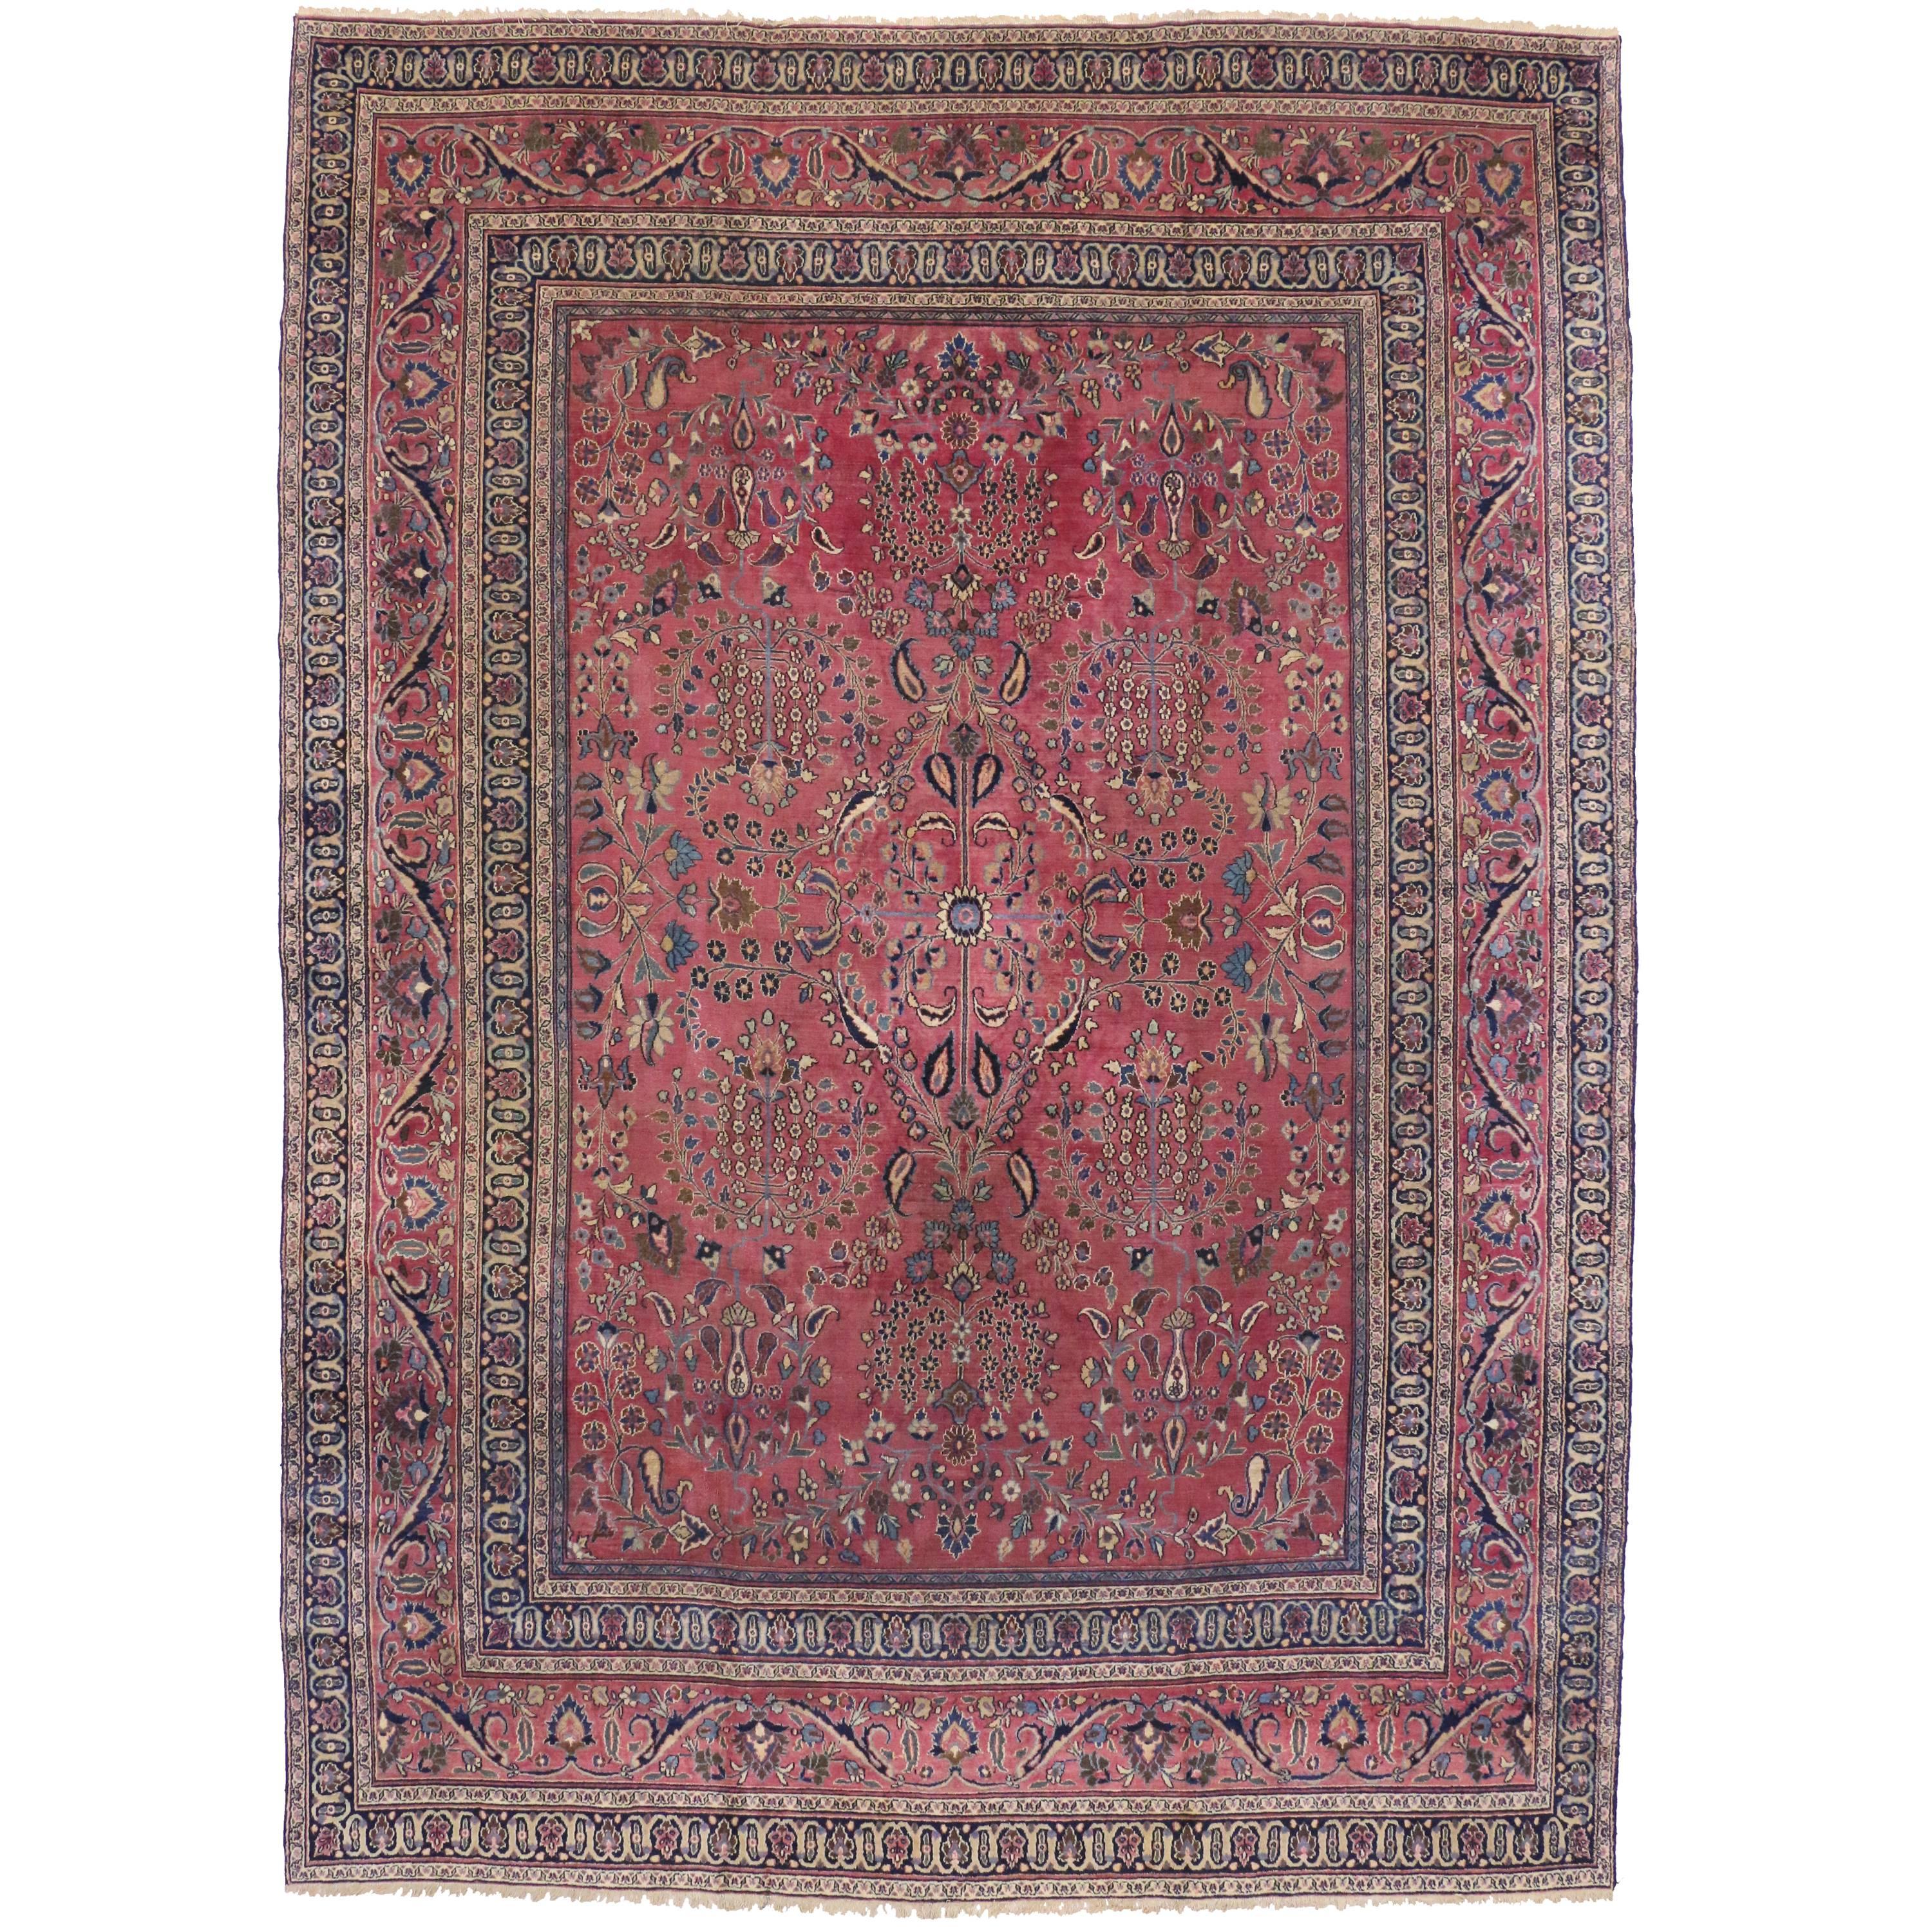 Antique Persian Khorassan Rug with Modern Victorian Style and Old World Vibes 